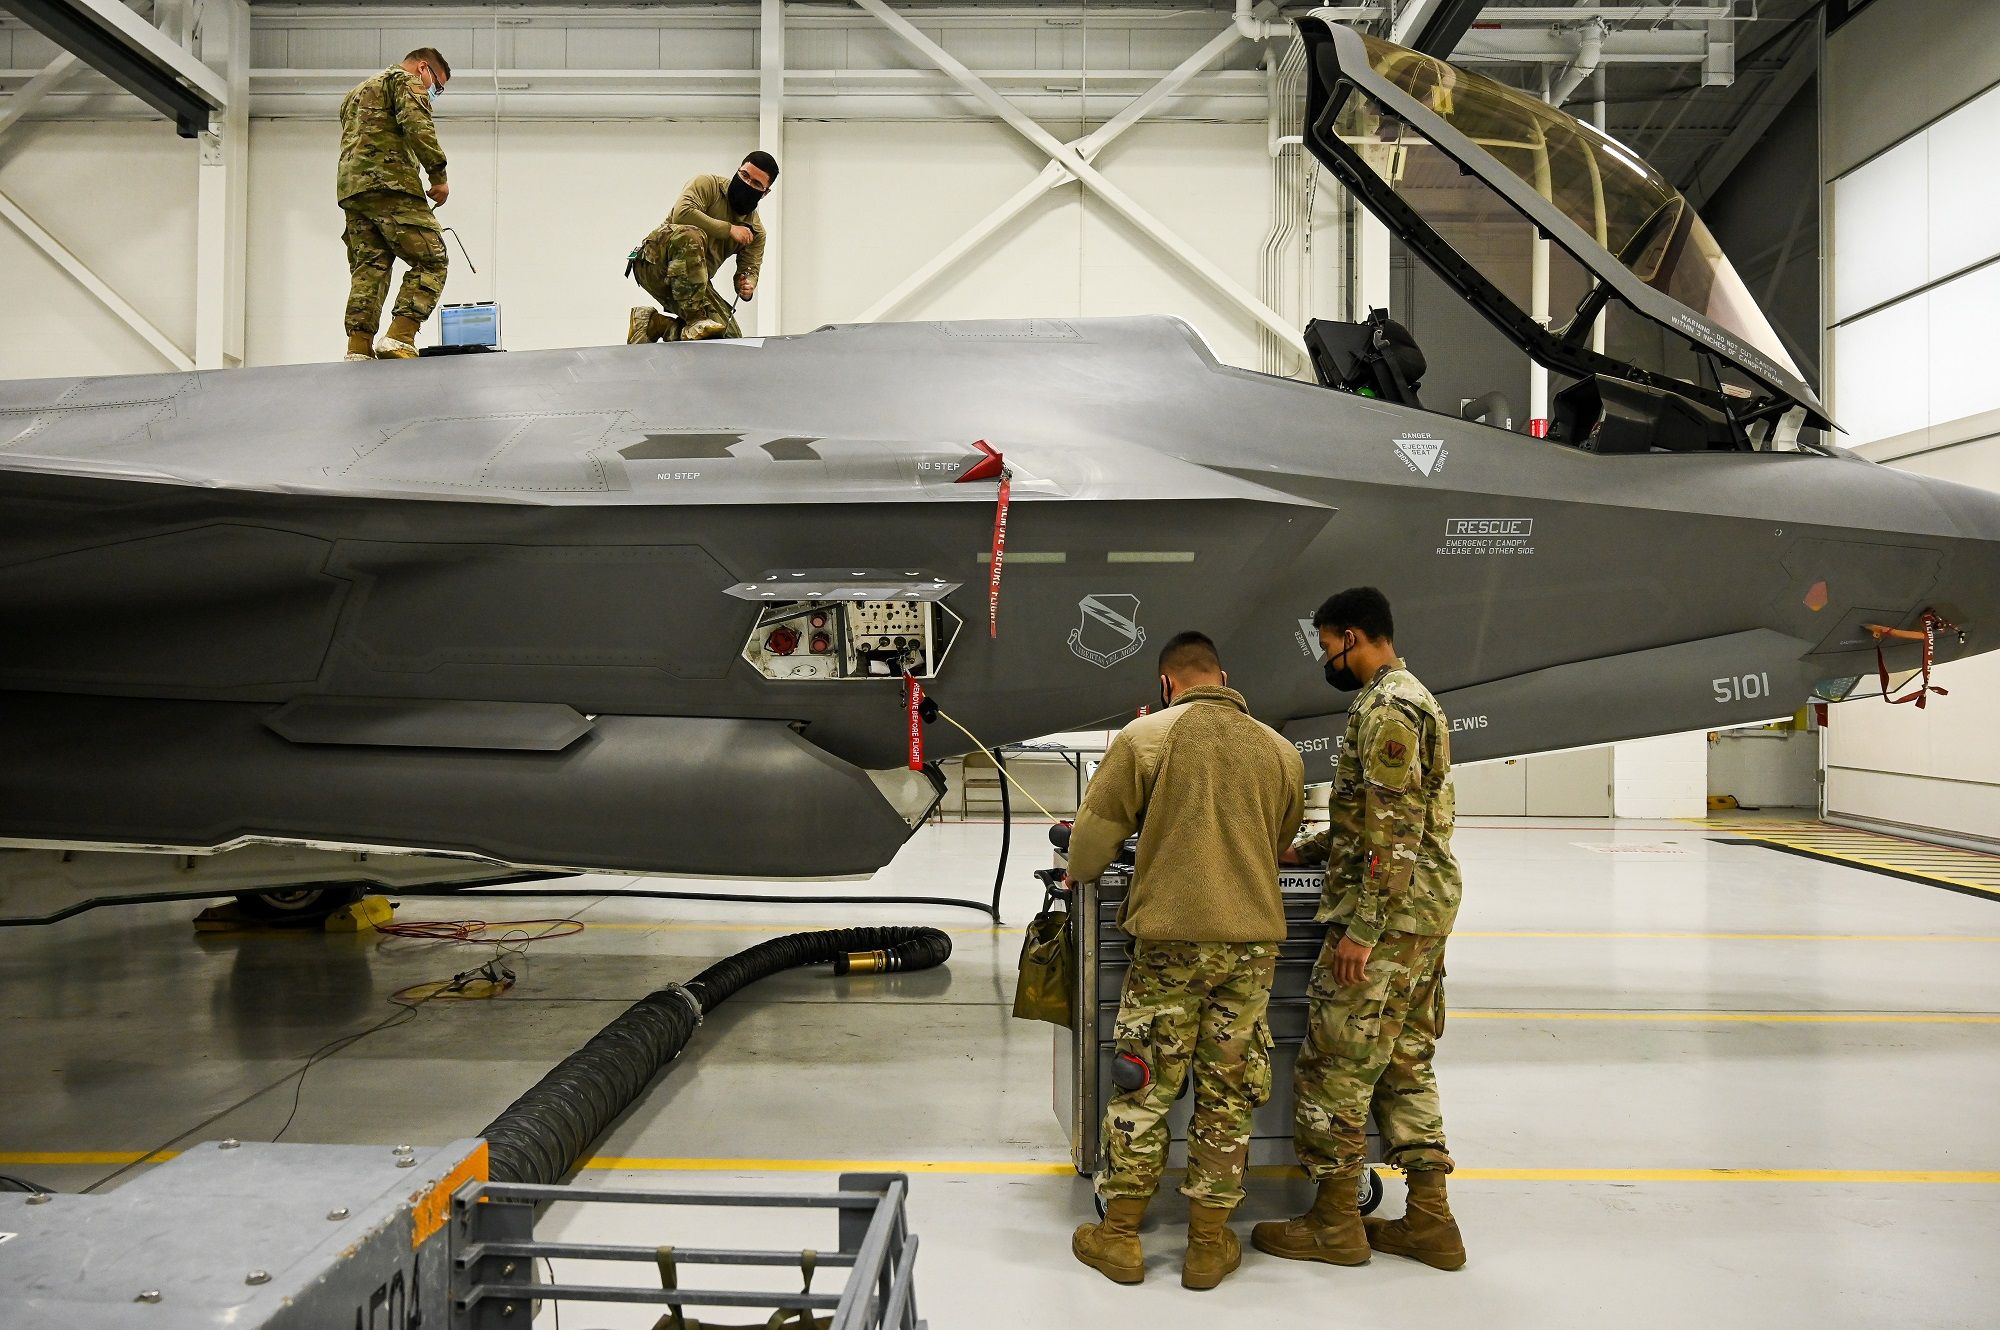 Only Half Of the F-35 Fleet is Mission-Ready